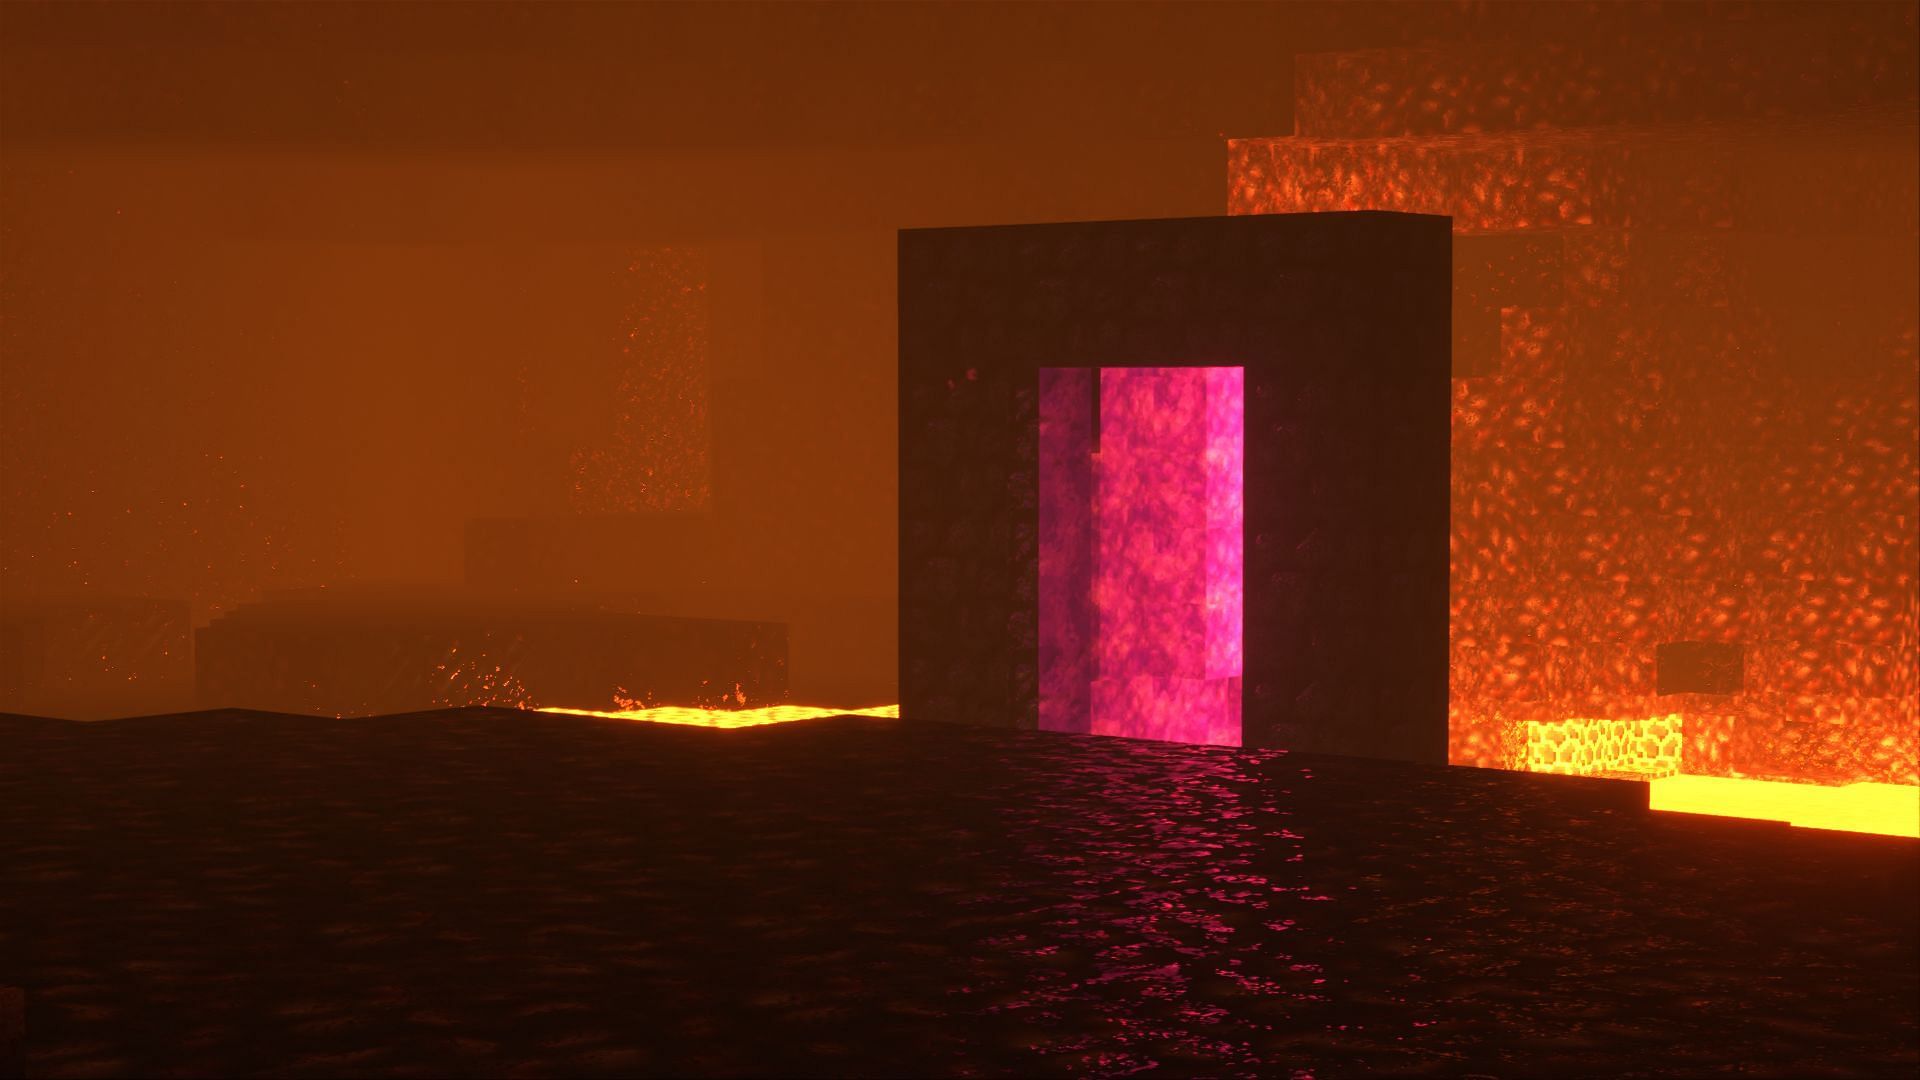 Minecraft: 10 Things You Need To Know Before Visiting The Nether